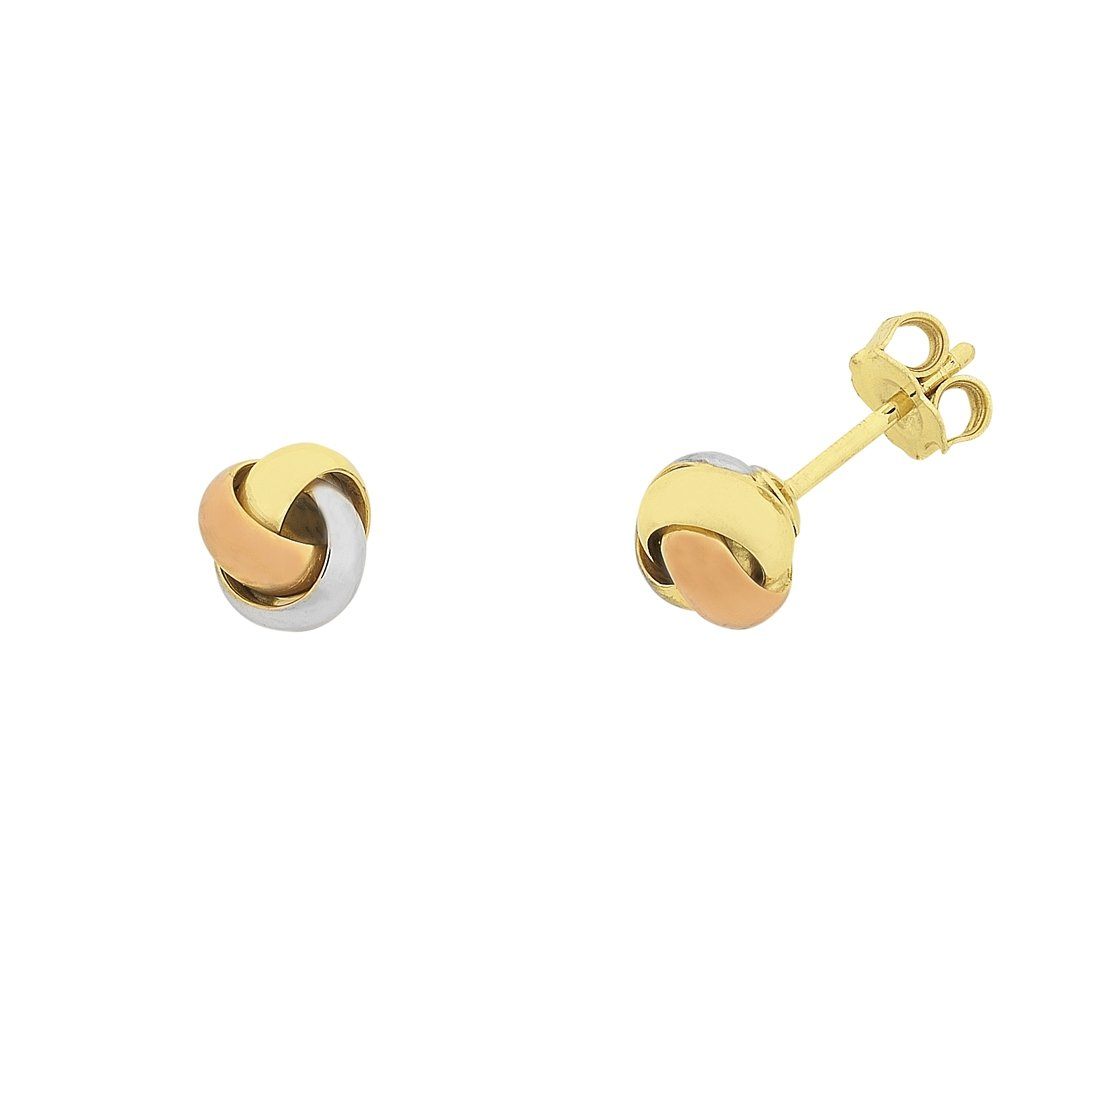 Bevilles 9ct Yellow Gold Silver Infused 3 Tone Knotted Stud Earrings